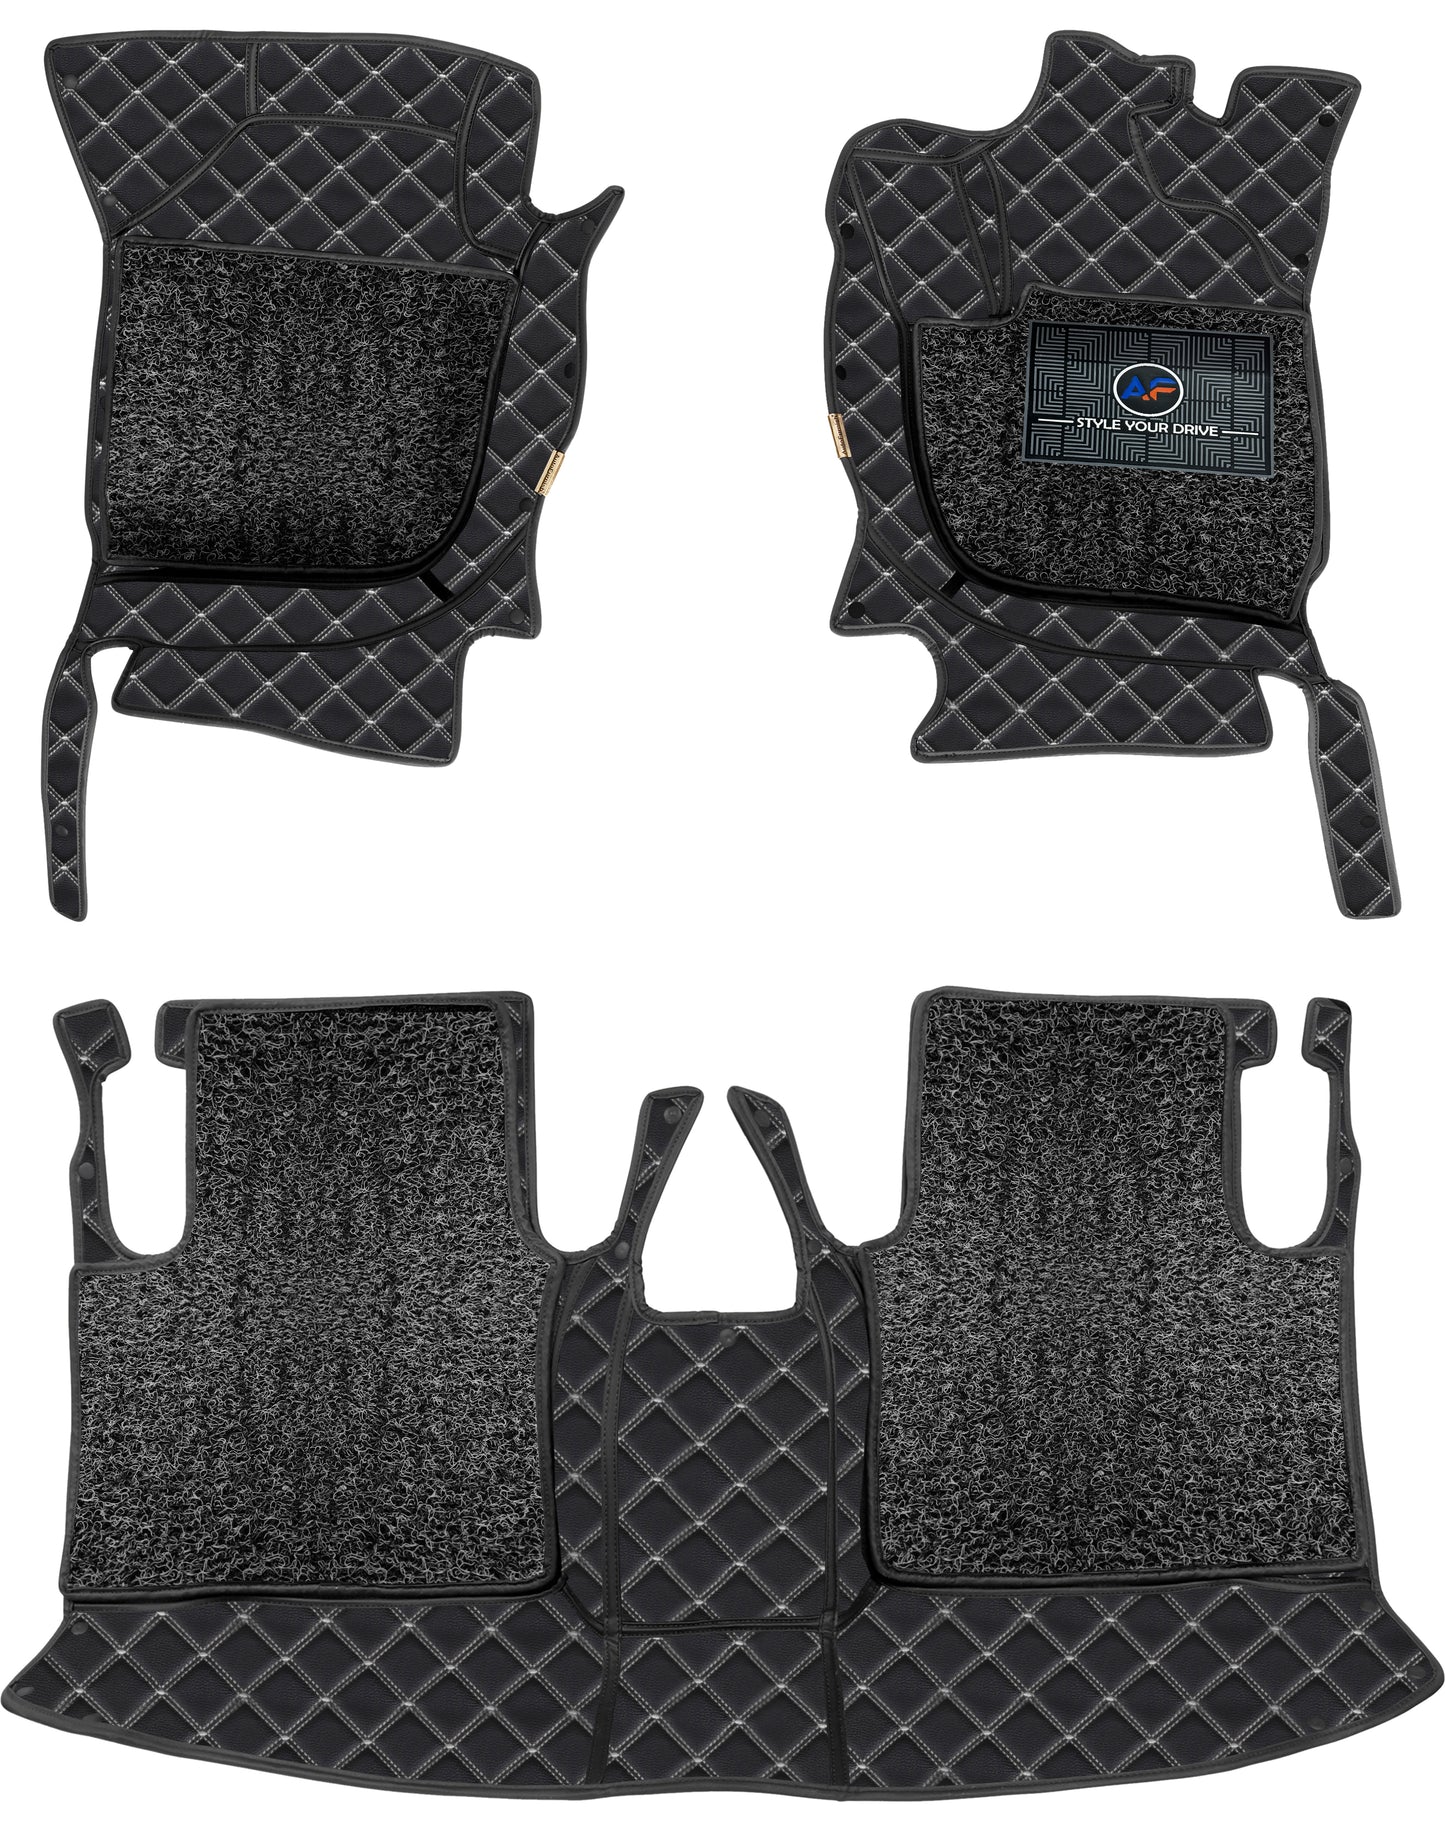 Hyundai Venue 2019-7D Luxury Car Mat, All Weather Proof, Anti-Skid, 100% Waterproof & Odorless with Unique Diamond Fish Design (24mm Luxury PU Leather, 2 Rows)